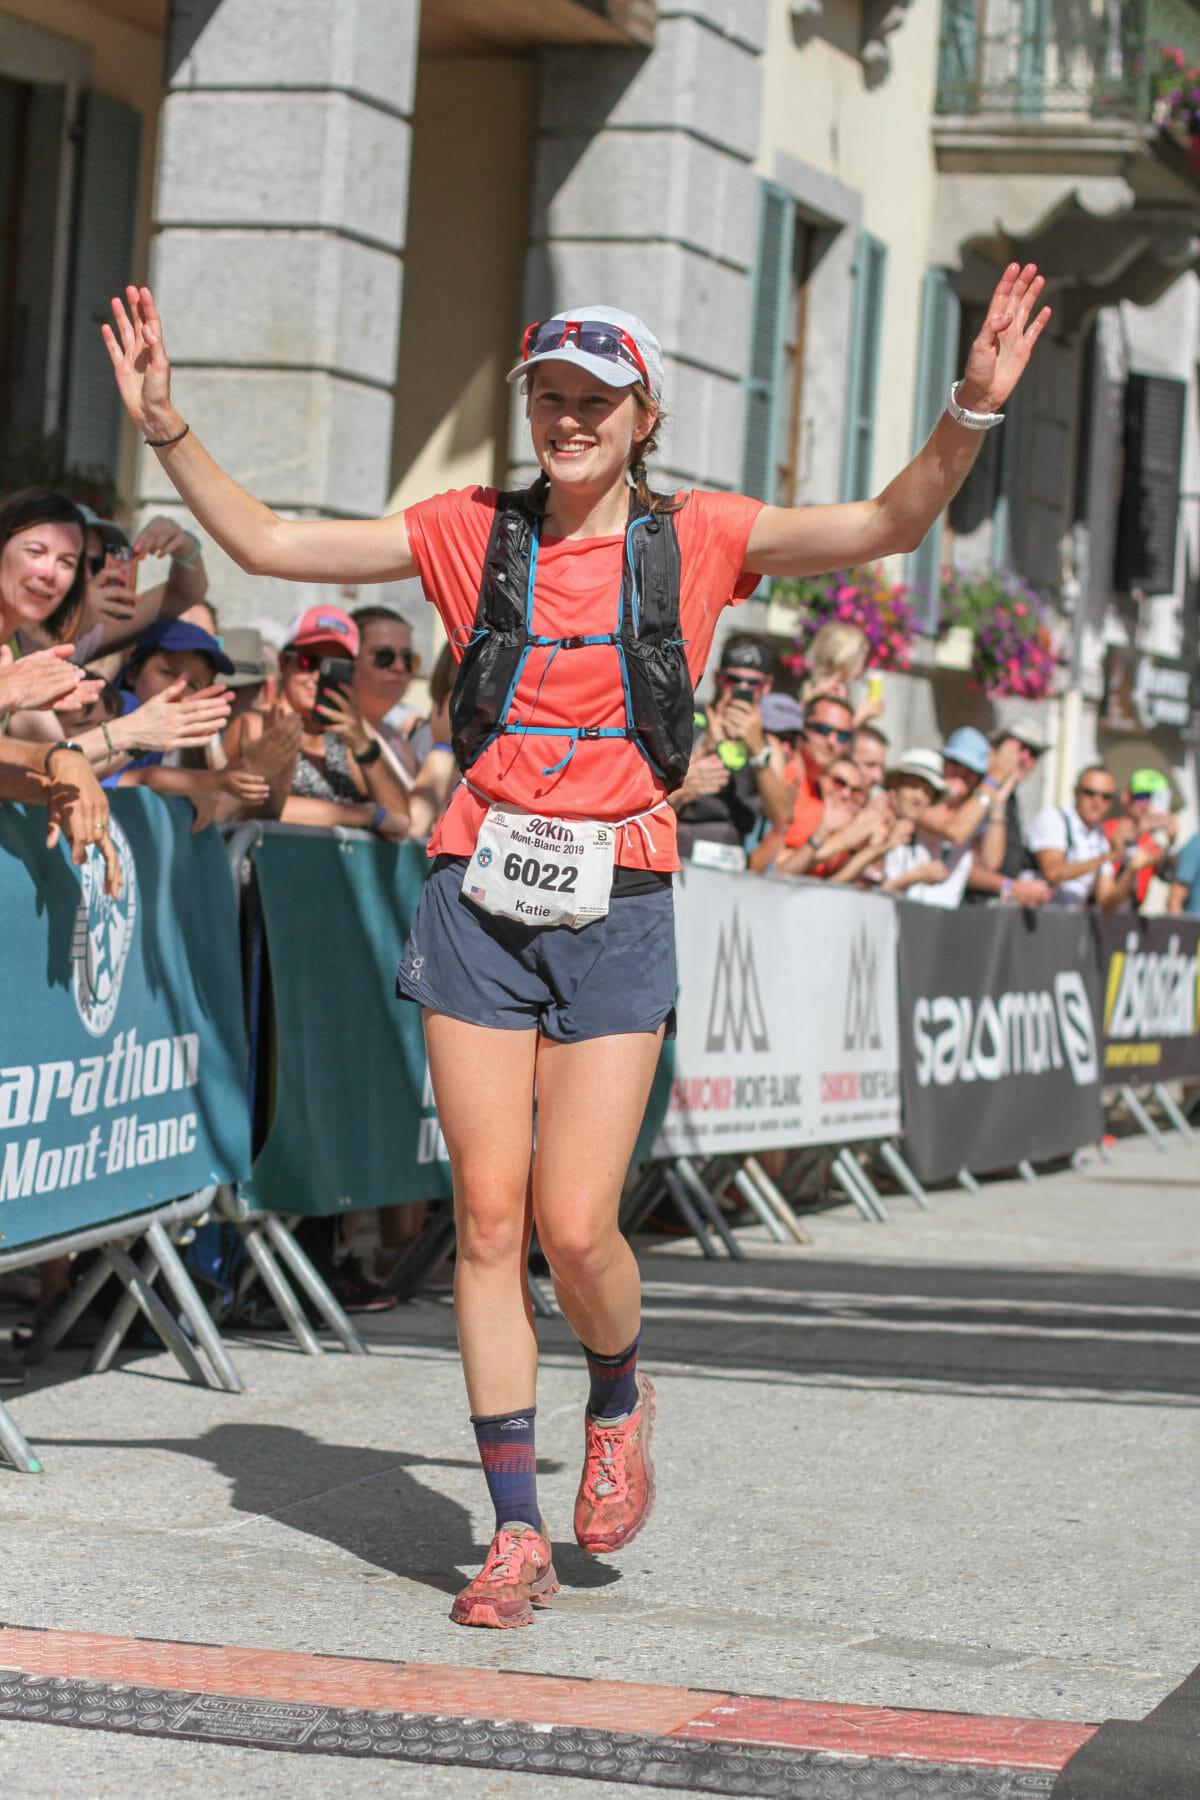 Katie Schide finishing first in the 2019 90k du Mont Blanc (Photo: Chase Willie)